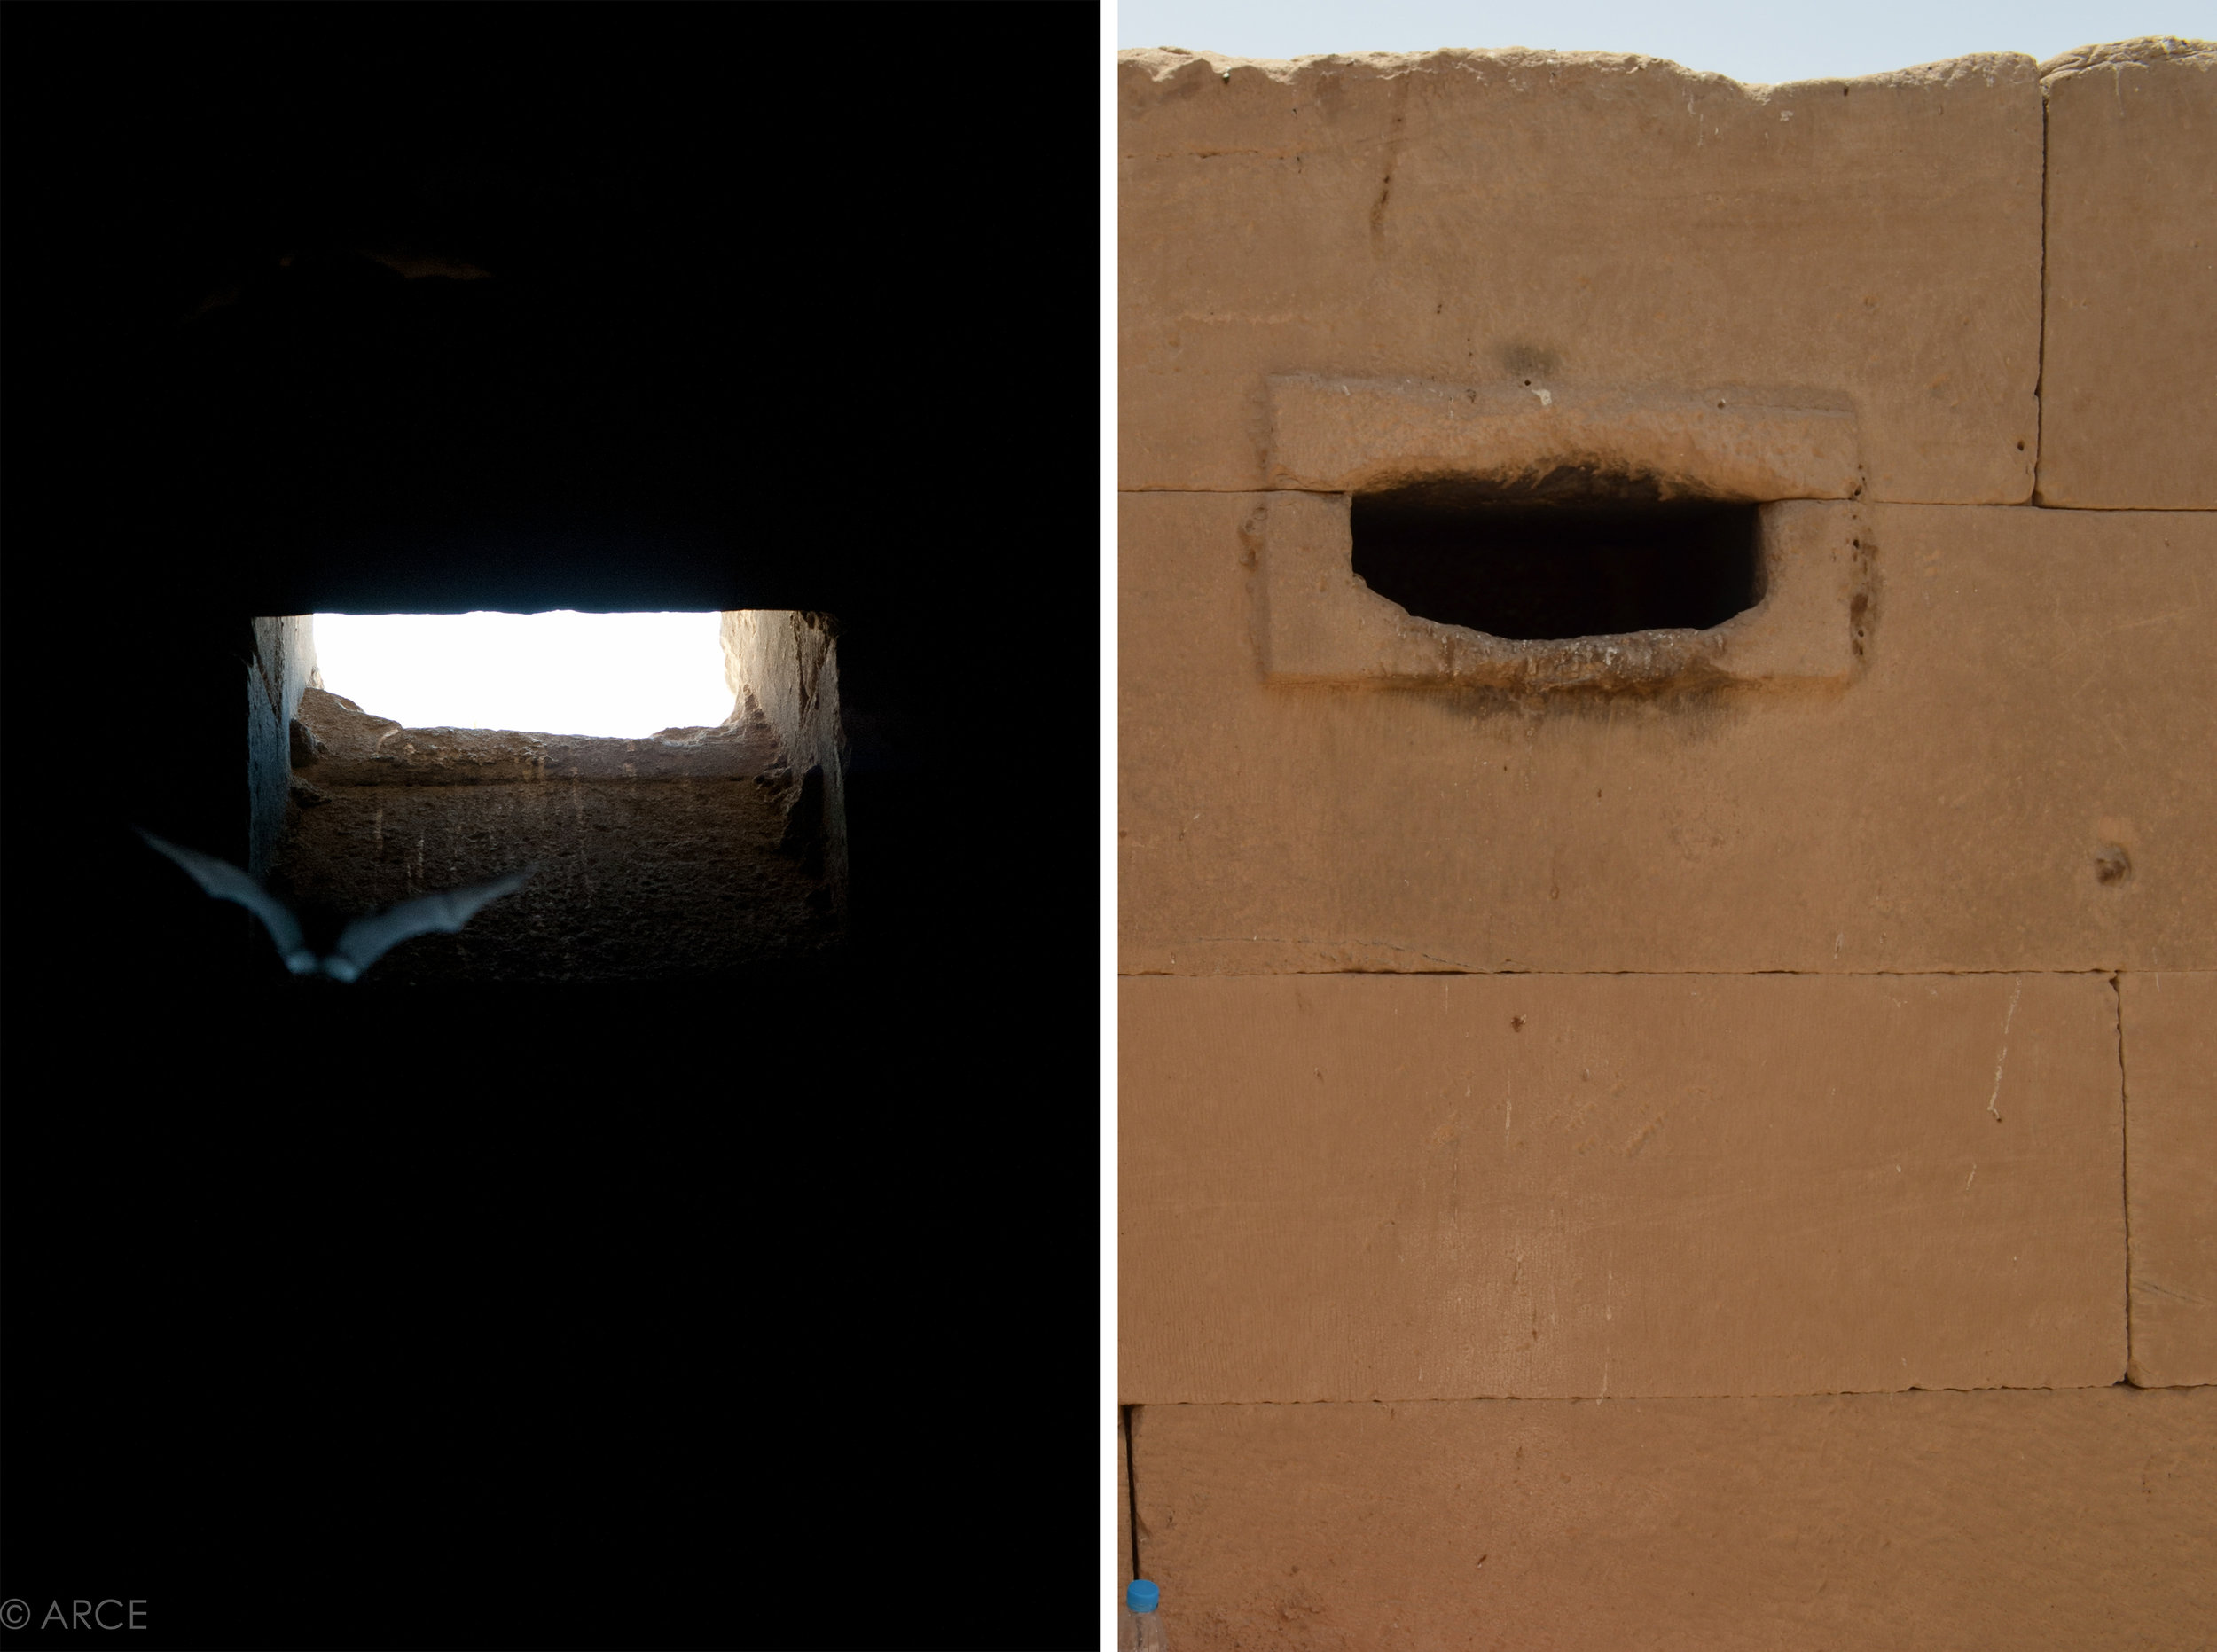  A bat shown exiting the temple through one of two major egress points just after sunset. The most successful means of eradicating a bat infestation is through exclusion, allowing the bats to exit the roost naturally for nighttime feeding and then se